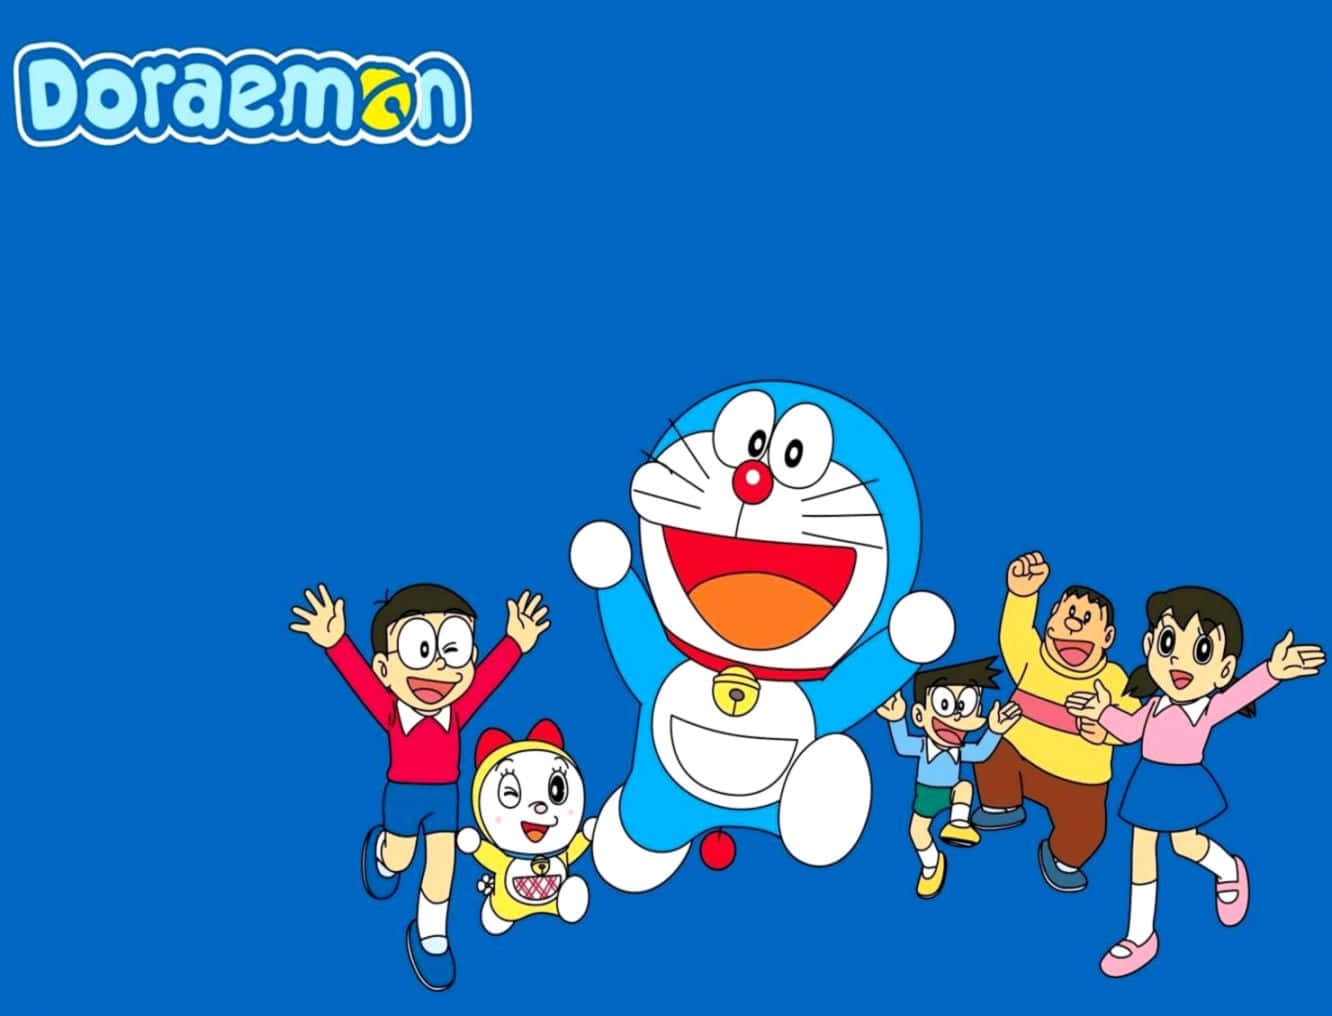 "No Matter The Situation, Doraemon Will Always Provide a Solution"